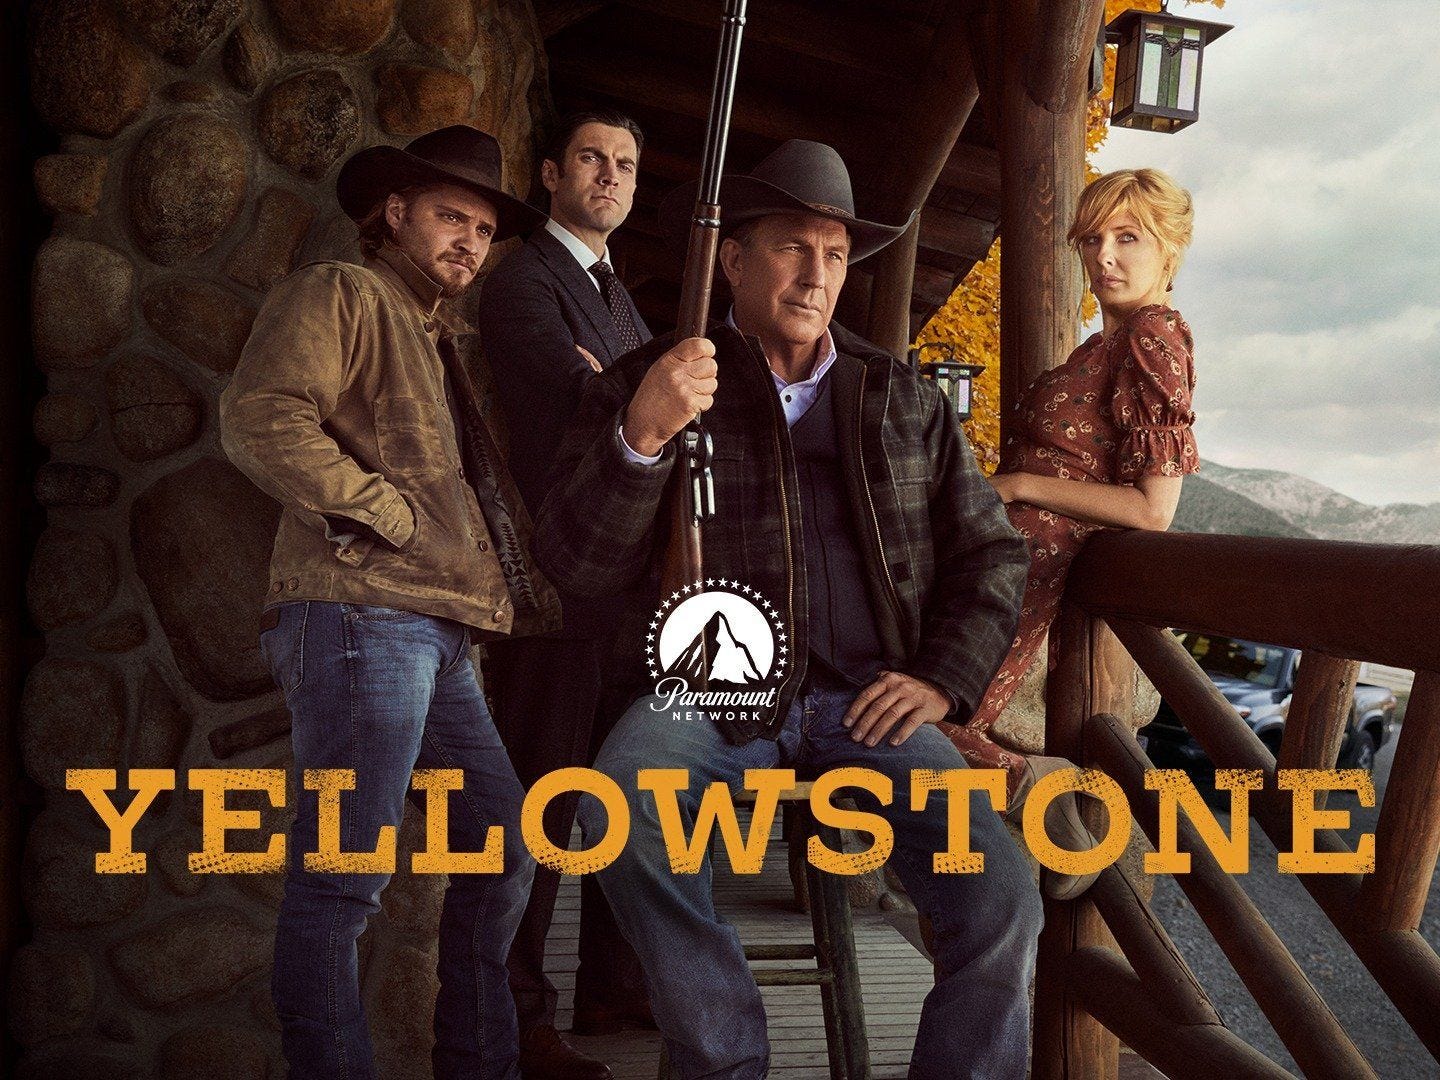 Yellowstone Season 1 All Episodes | Kevin costner, Yellowstone, All ...